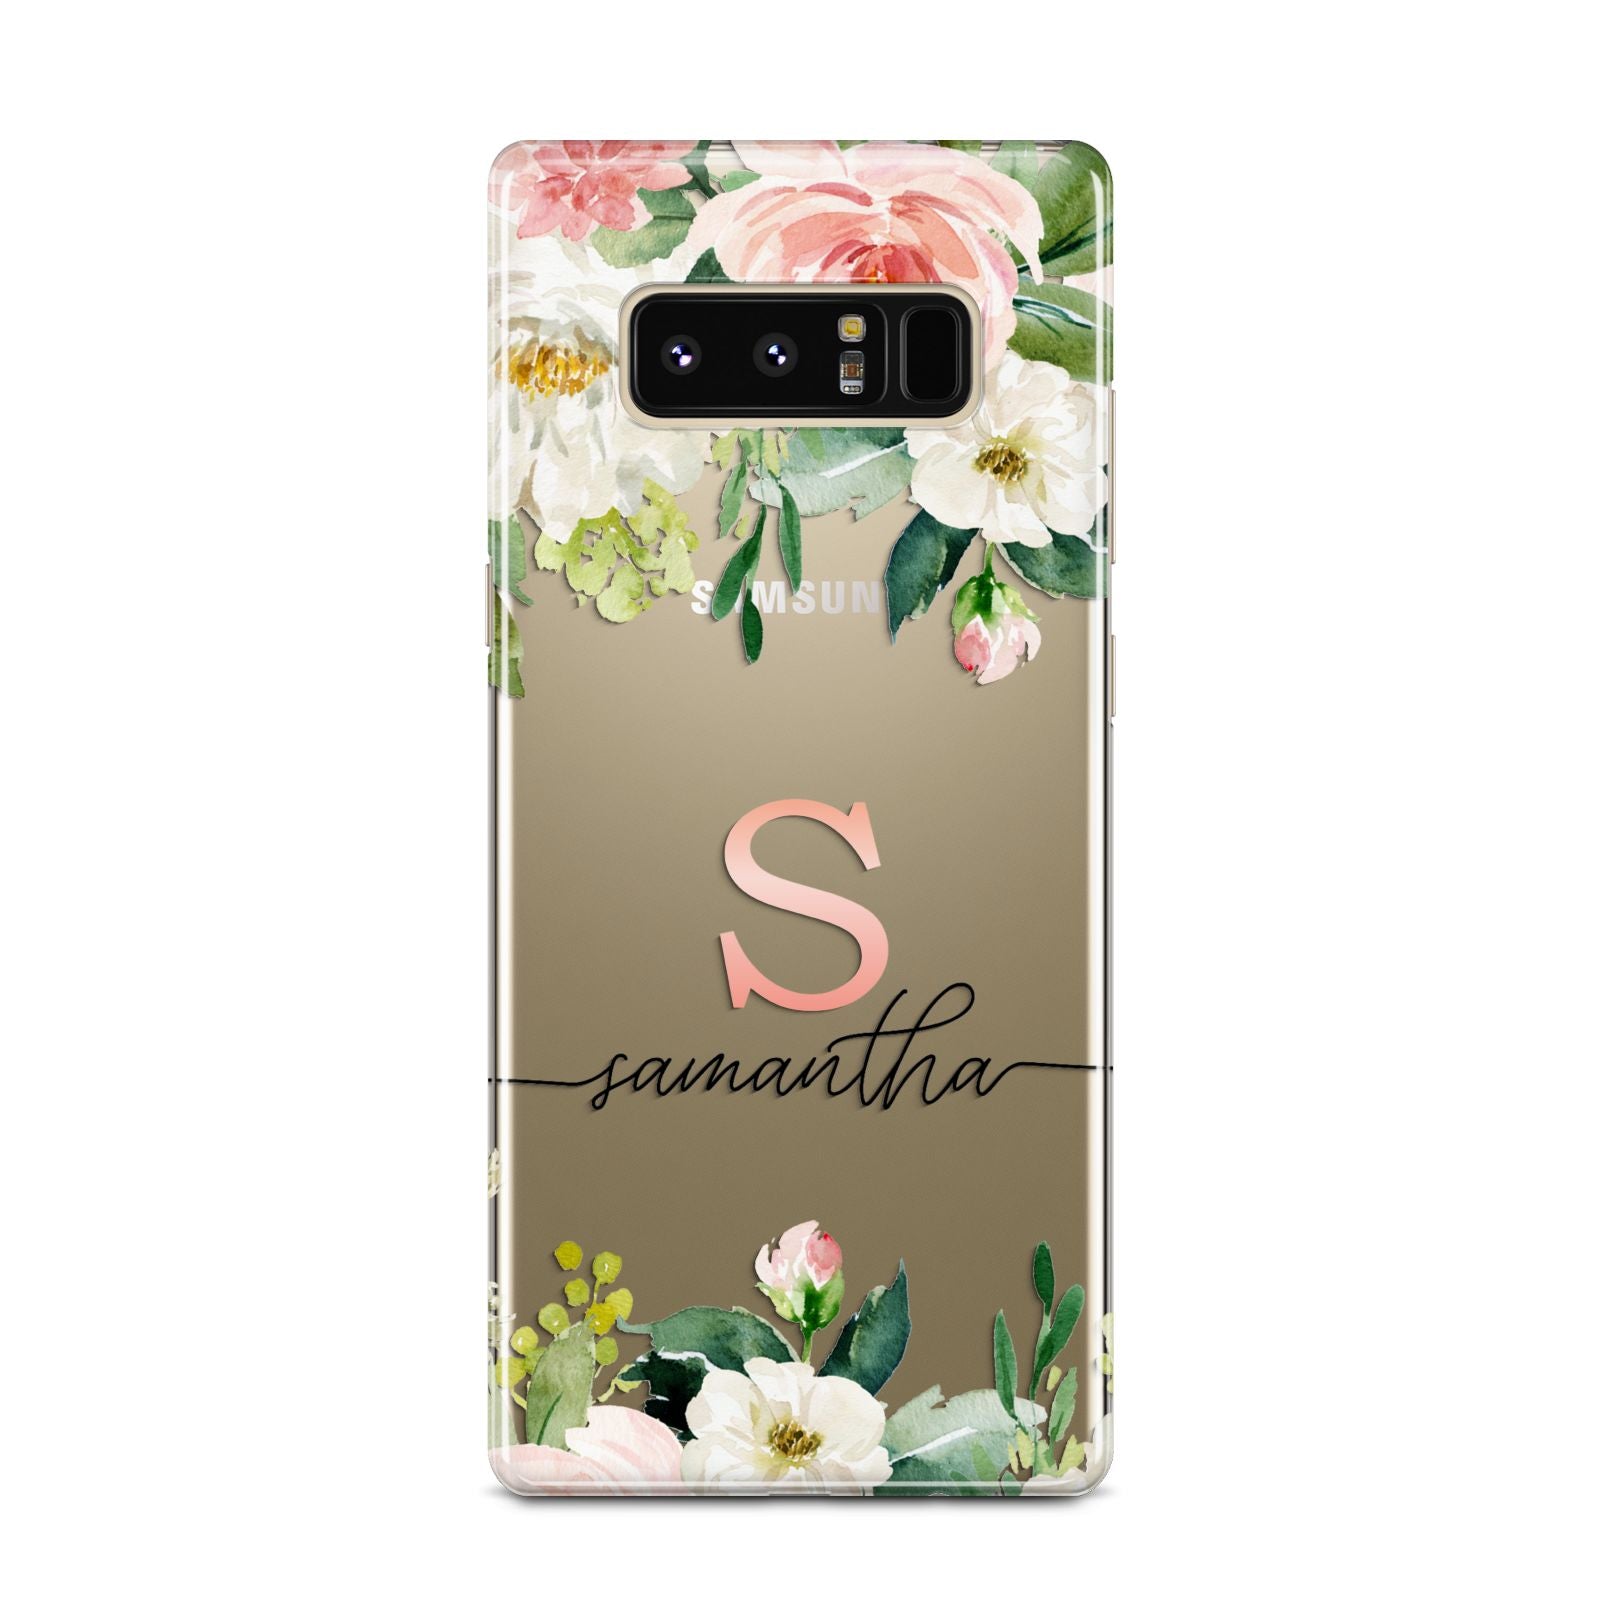 Monogrammed Floral Roses Samsung Galaxy Note 8 Case